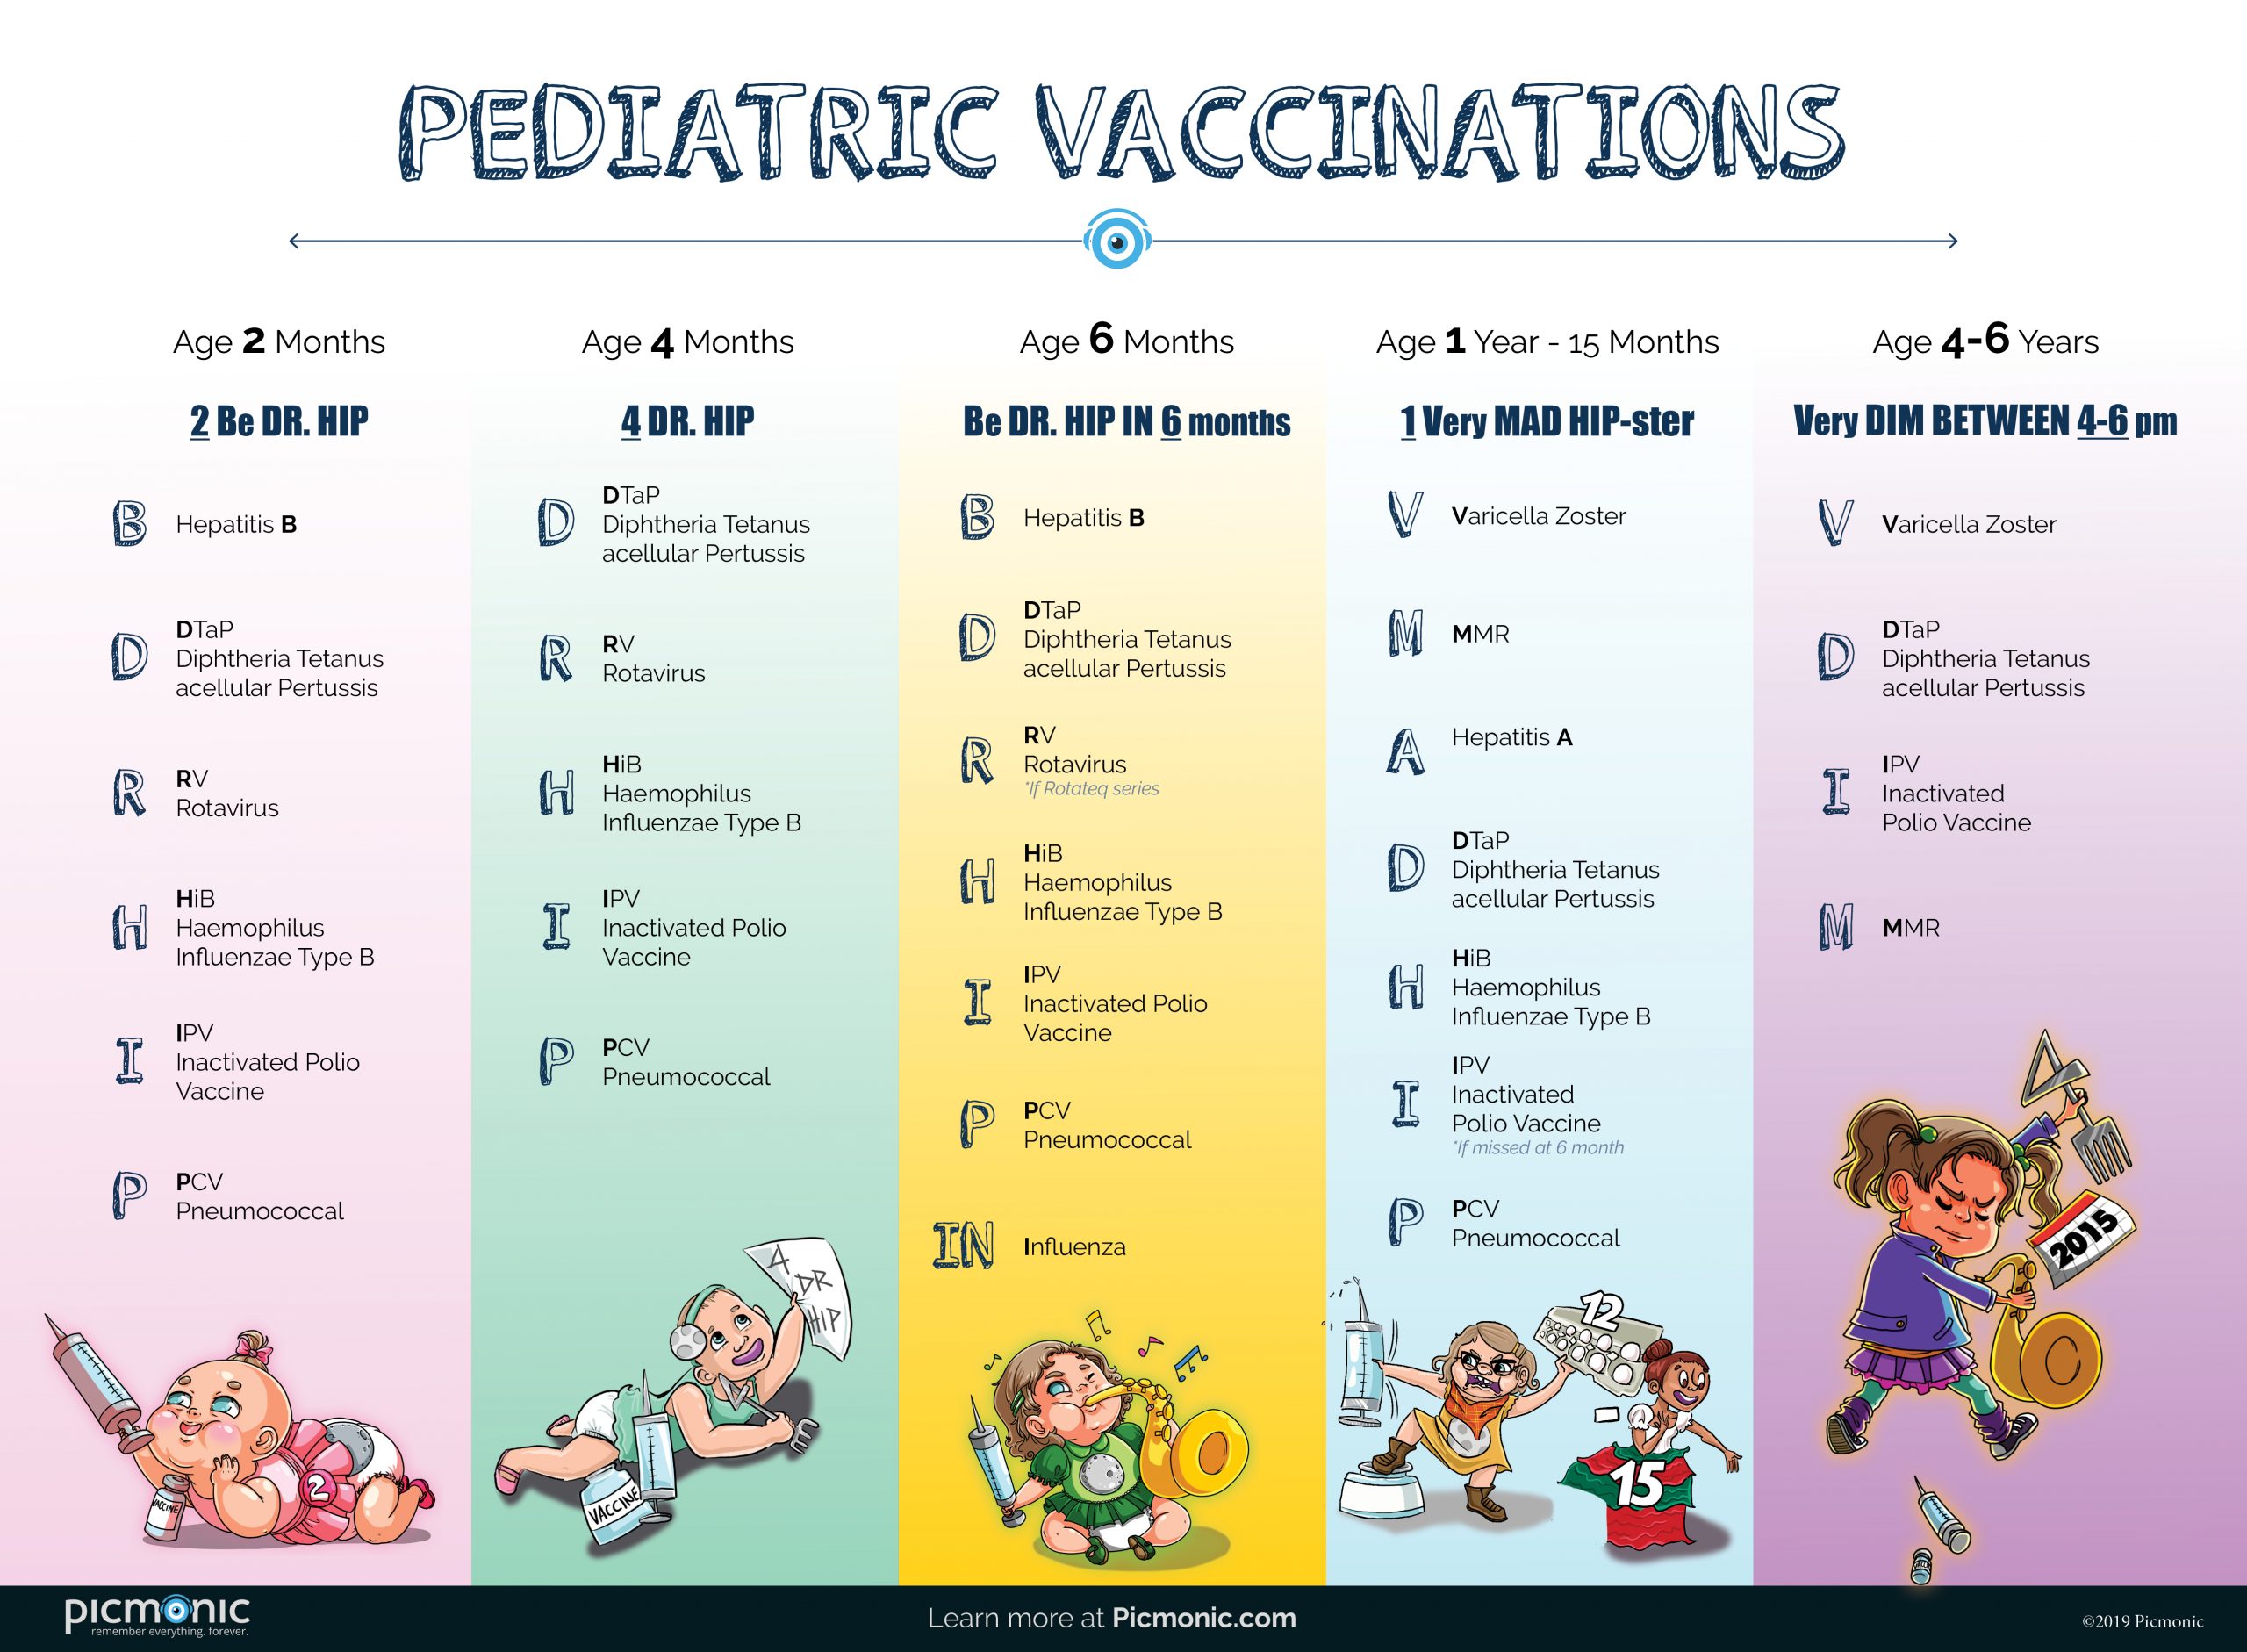 What is included in childhood vaccinations?